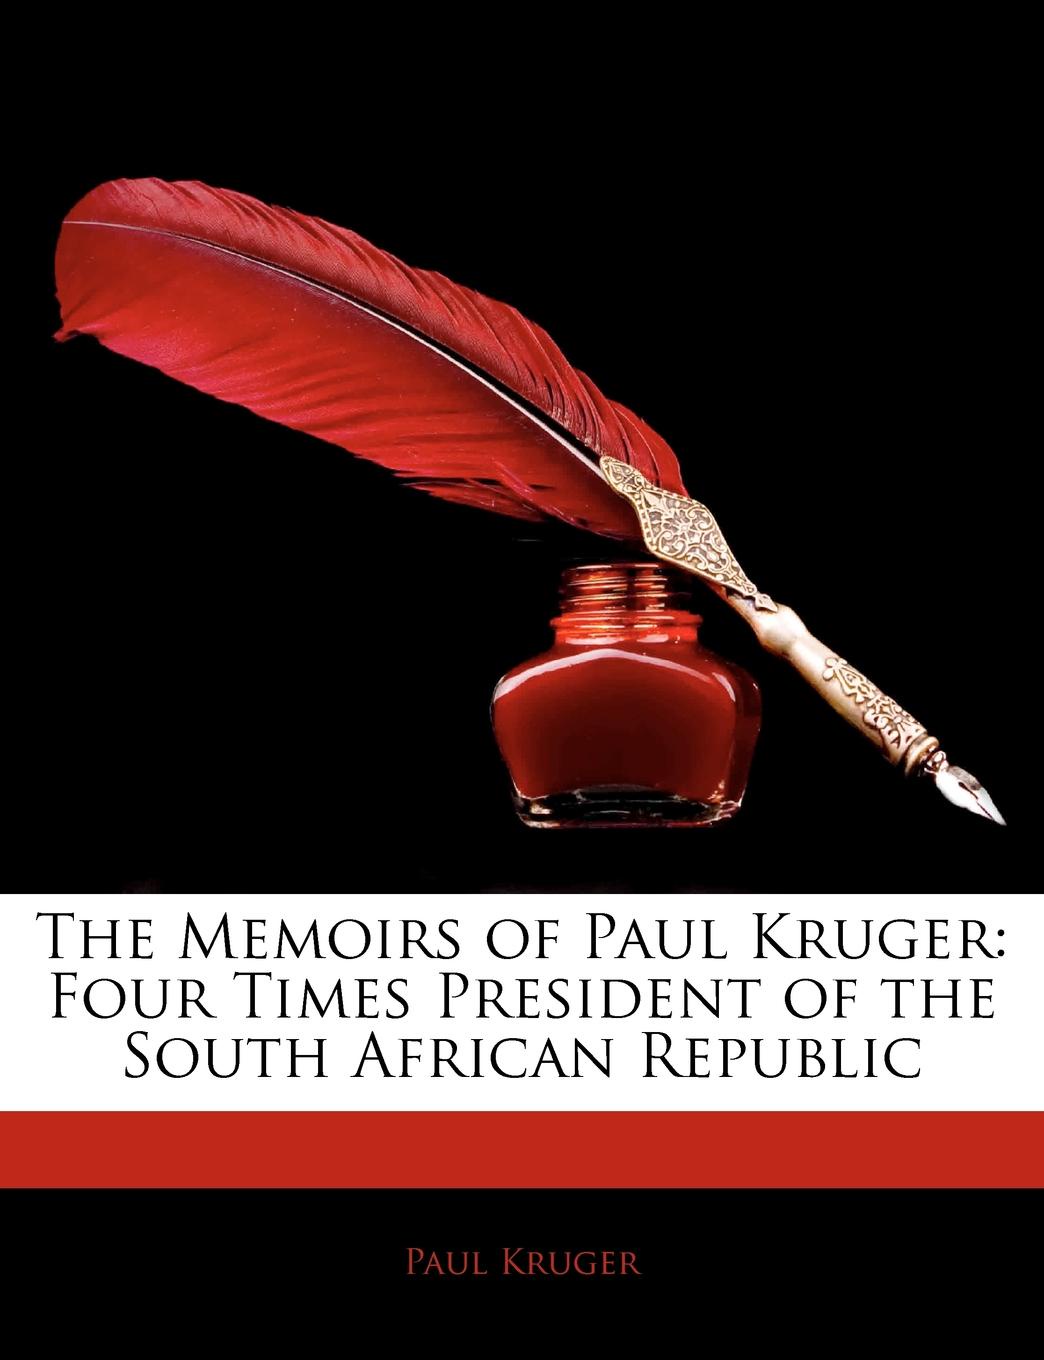 The Memoirs of Paul Kruger. Four Times President of the South African Republic